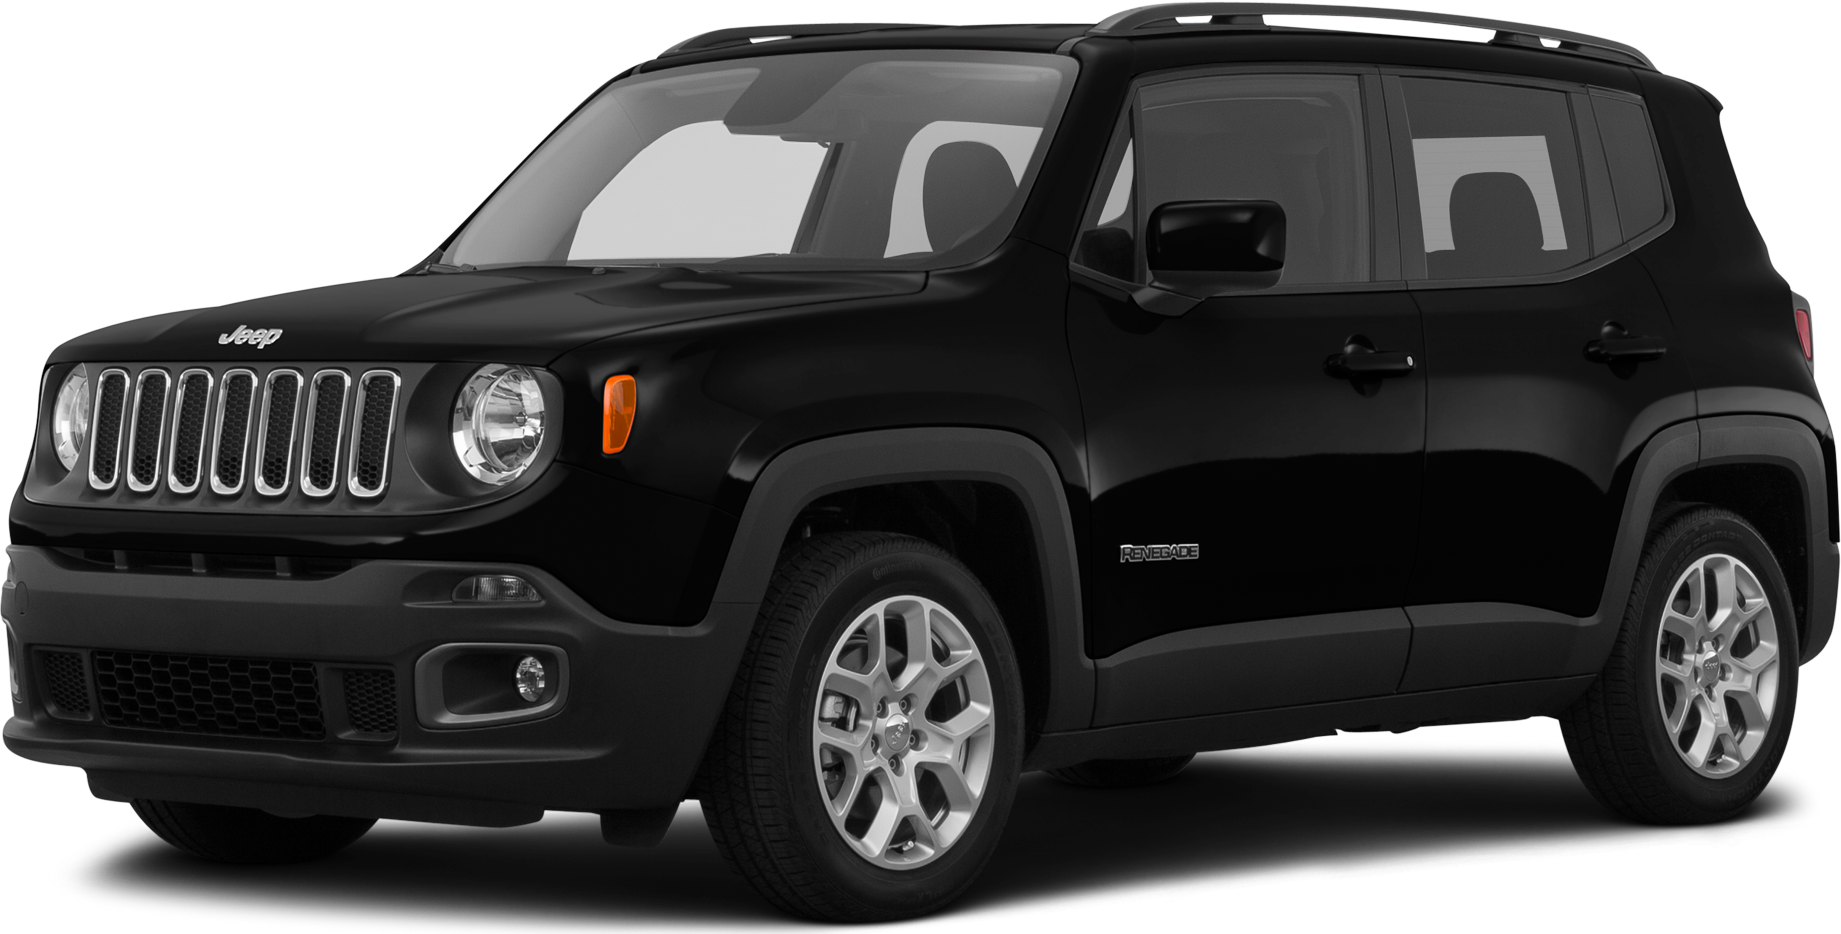 2015 Jeep Renegade Review, Pricing, & Pictures